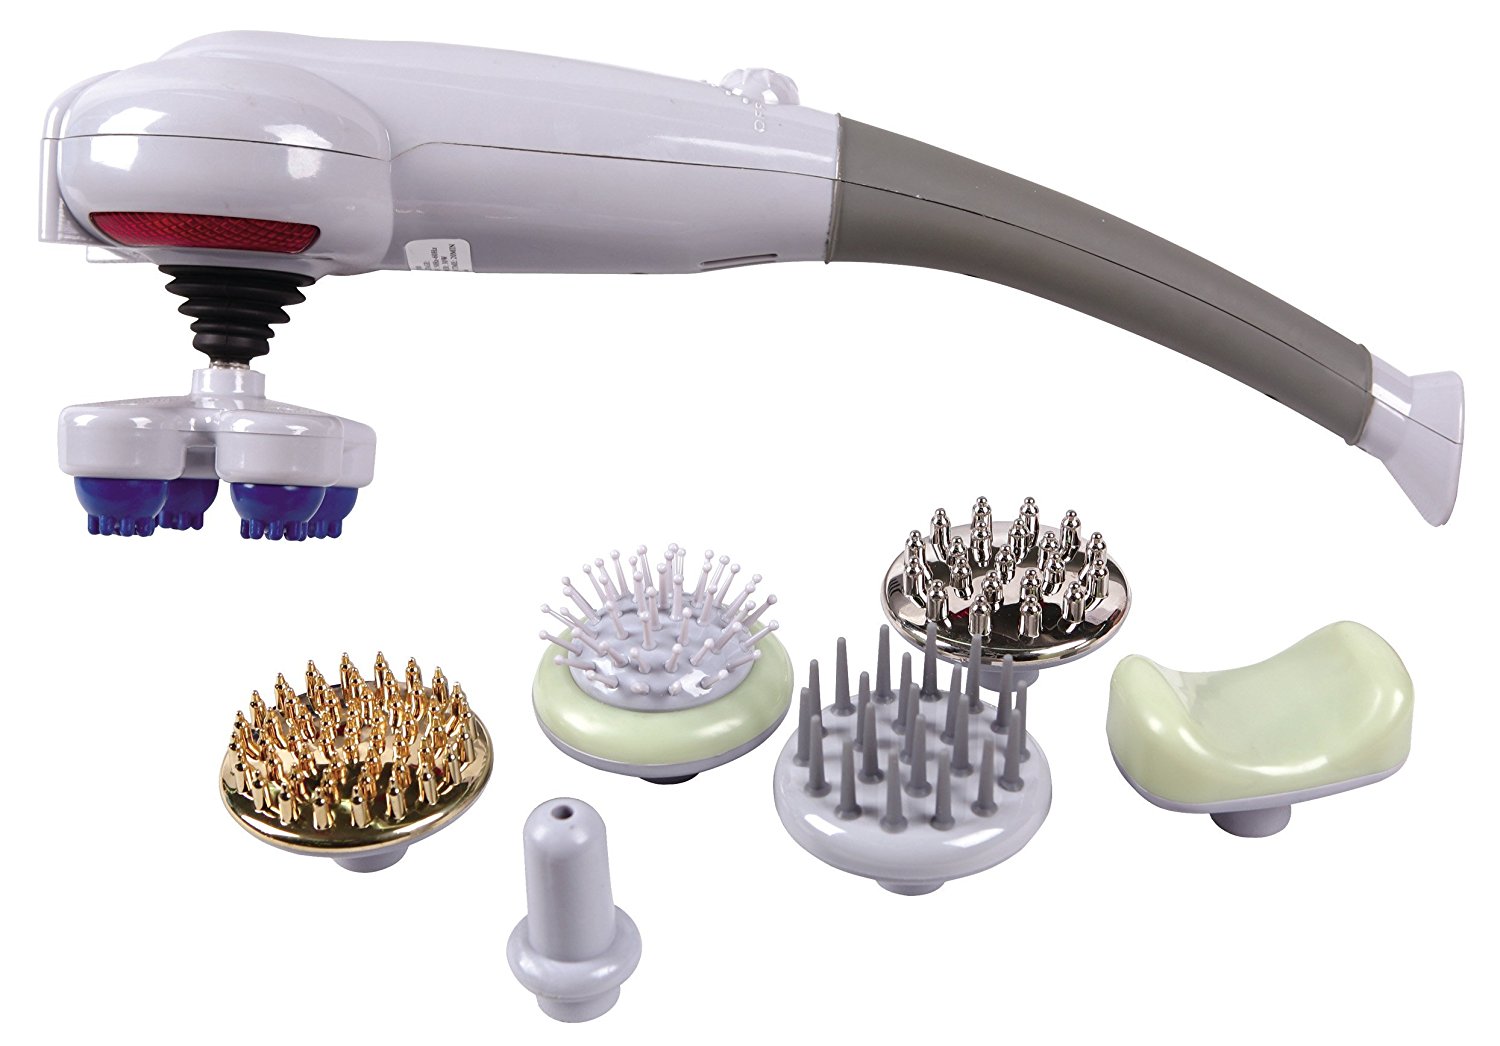 Buy Magic 889a Full Body Massager With 7 Attachments Massager Grey Online ₹1079 From Shopclues